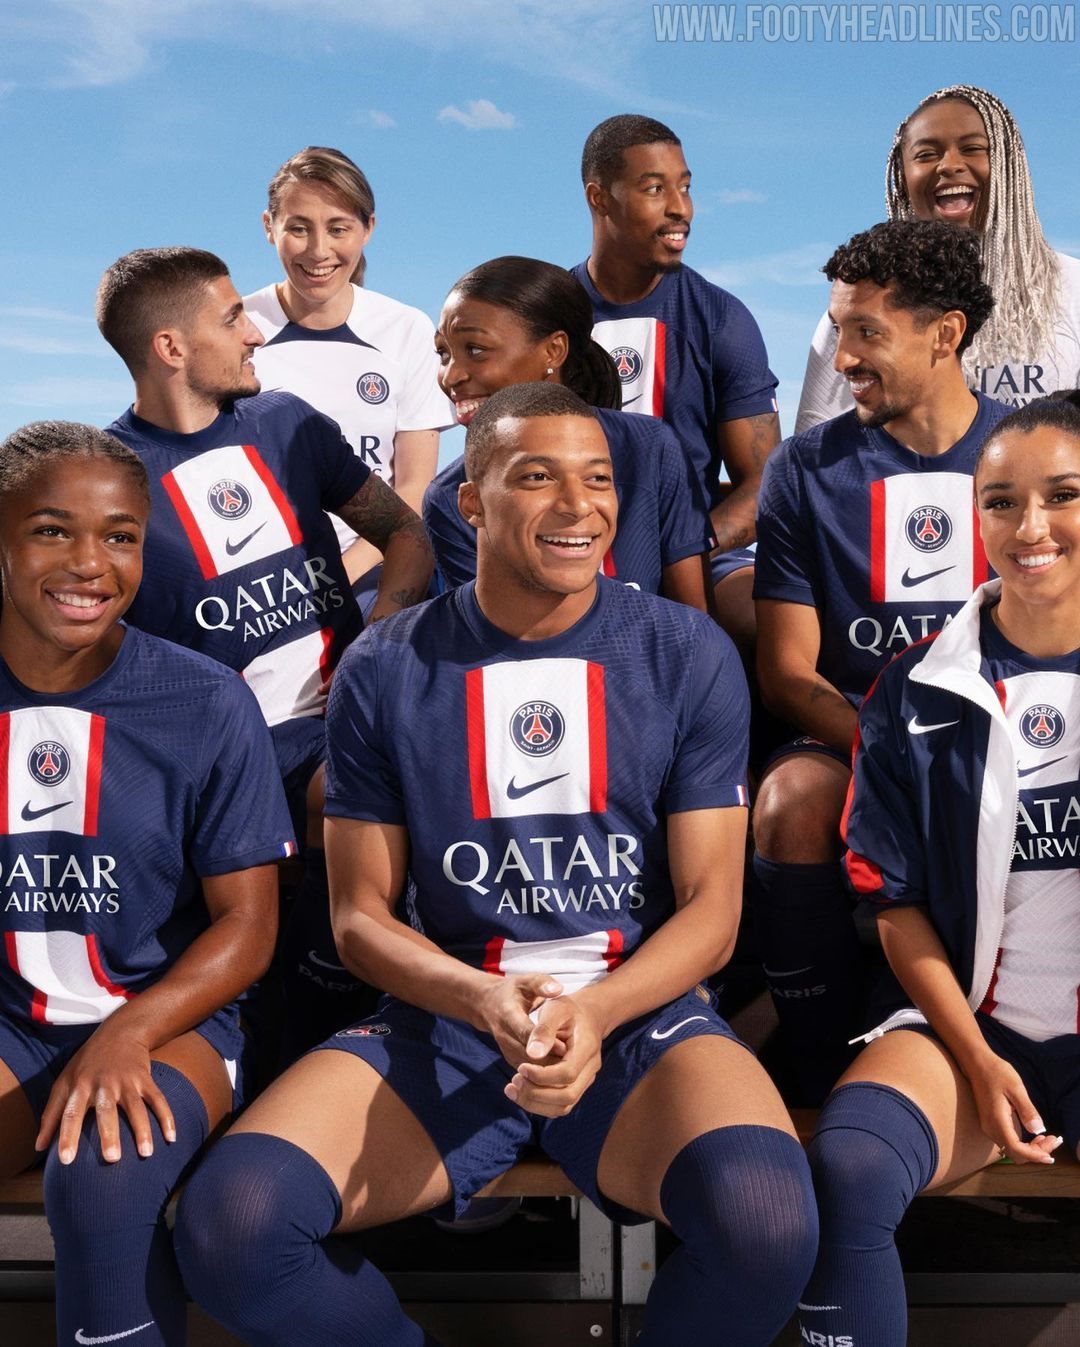 Report: PSG 22-23 Kit to Feature Star - France Stars Kit Rule Explained -  Footy Headlines